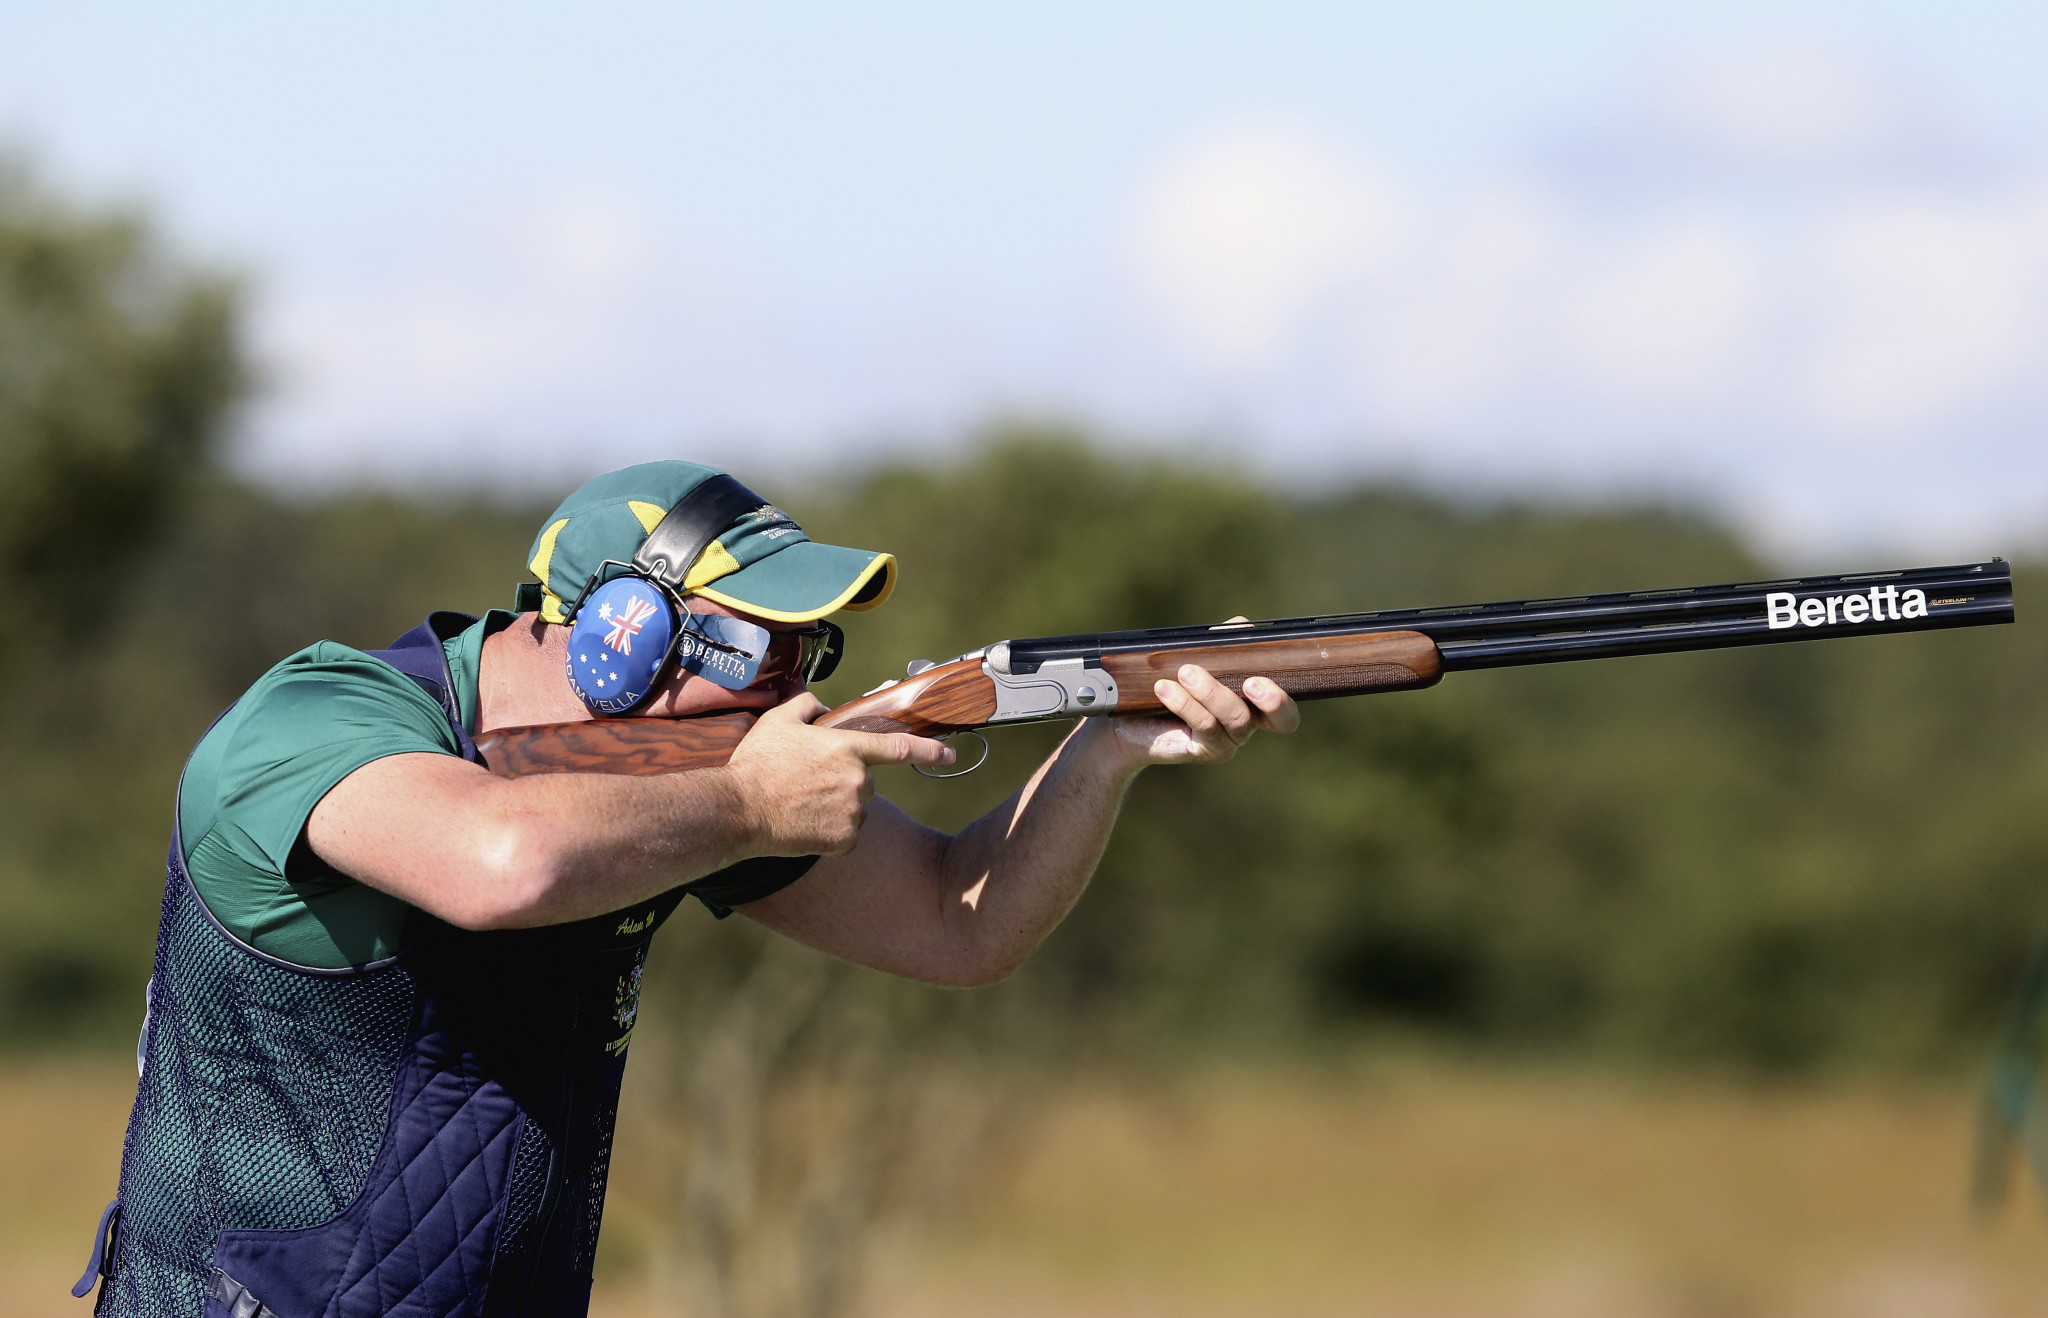 Australian Olympic shooting champion claims needs to sell medals to pay debts